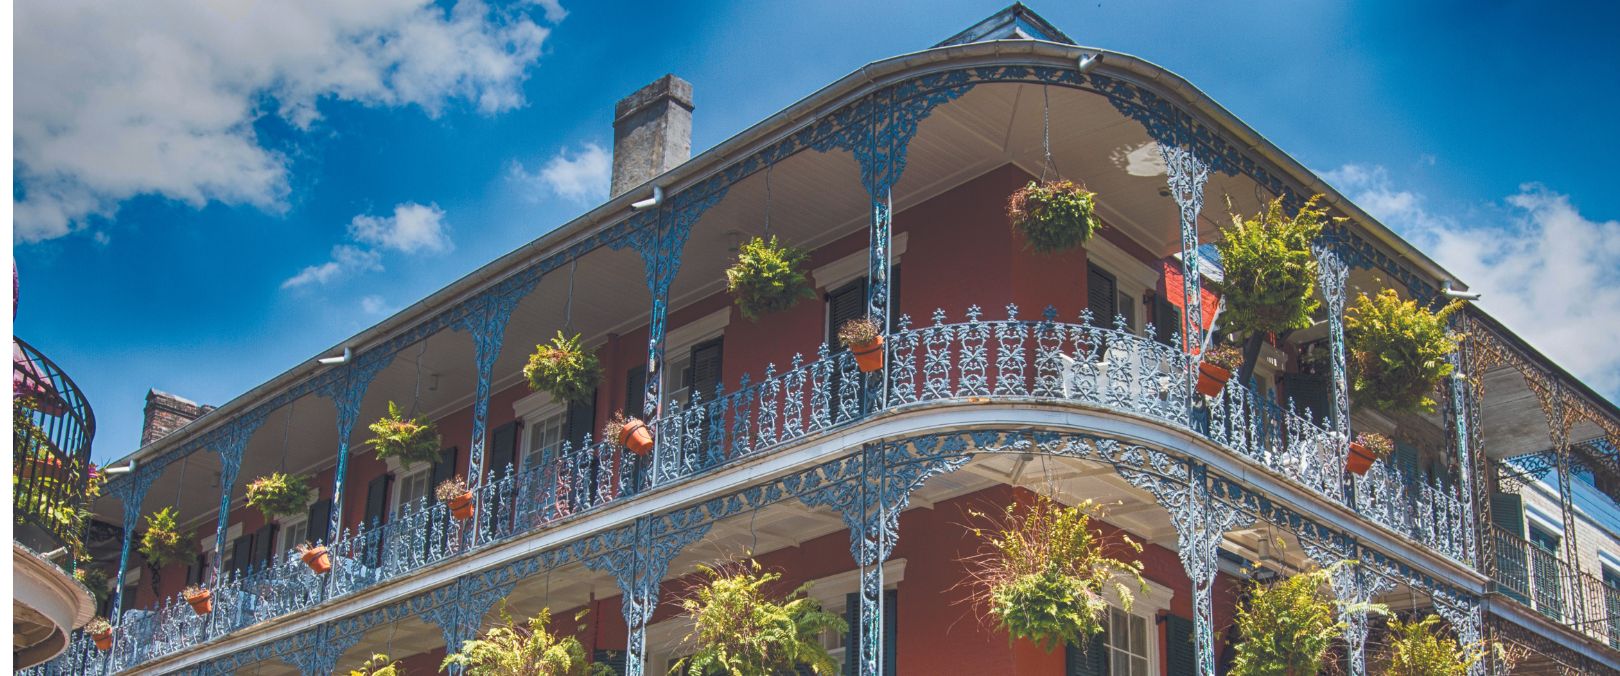 Photograph of an old building in New Orleans with prominent balconies.